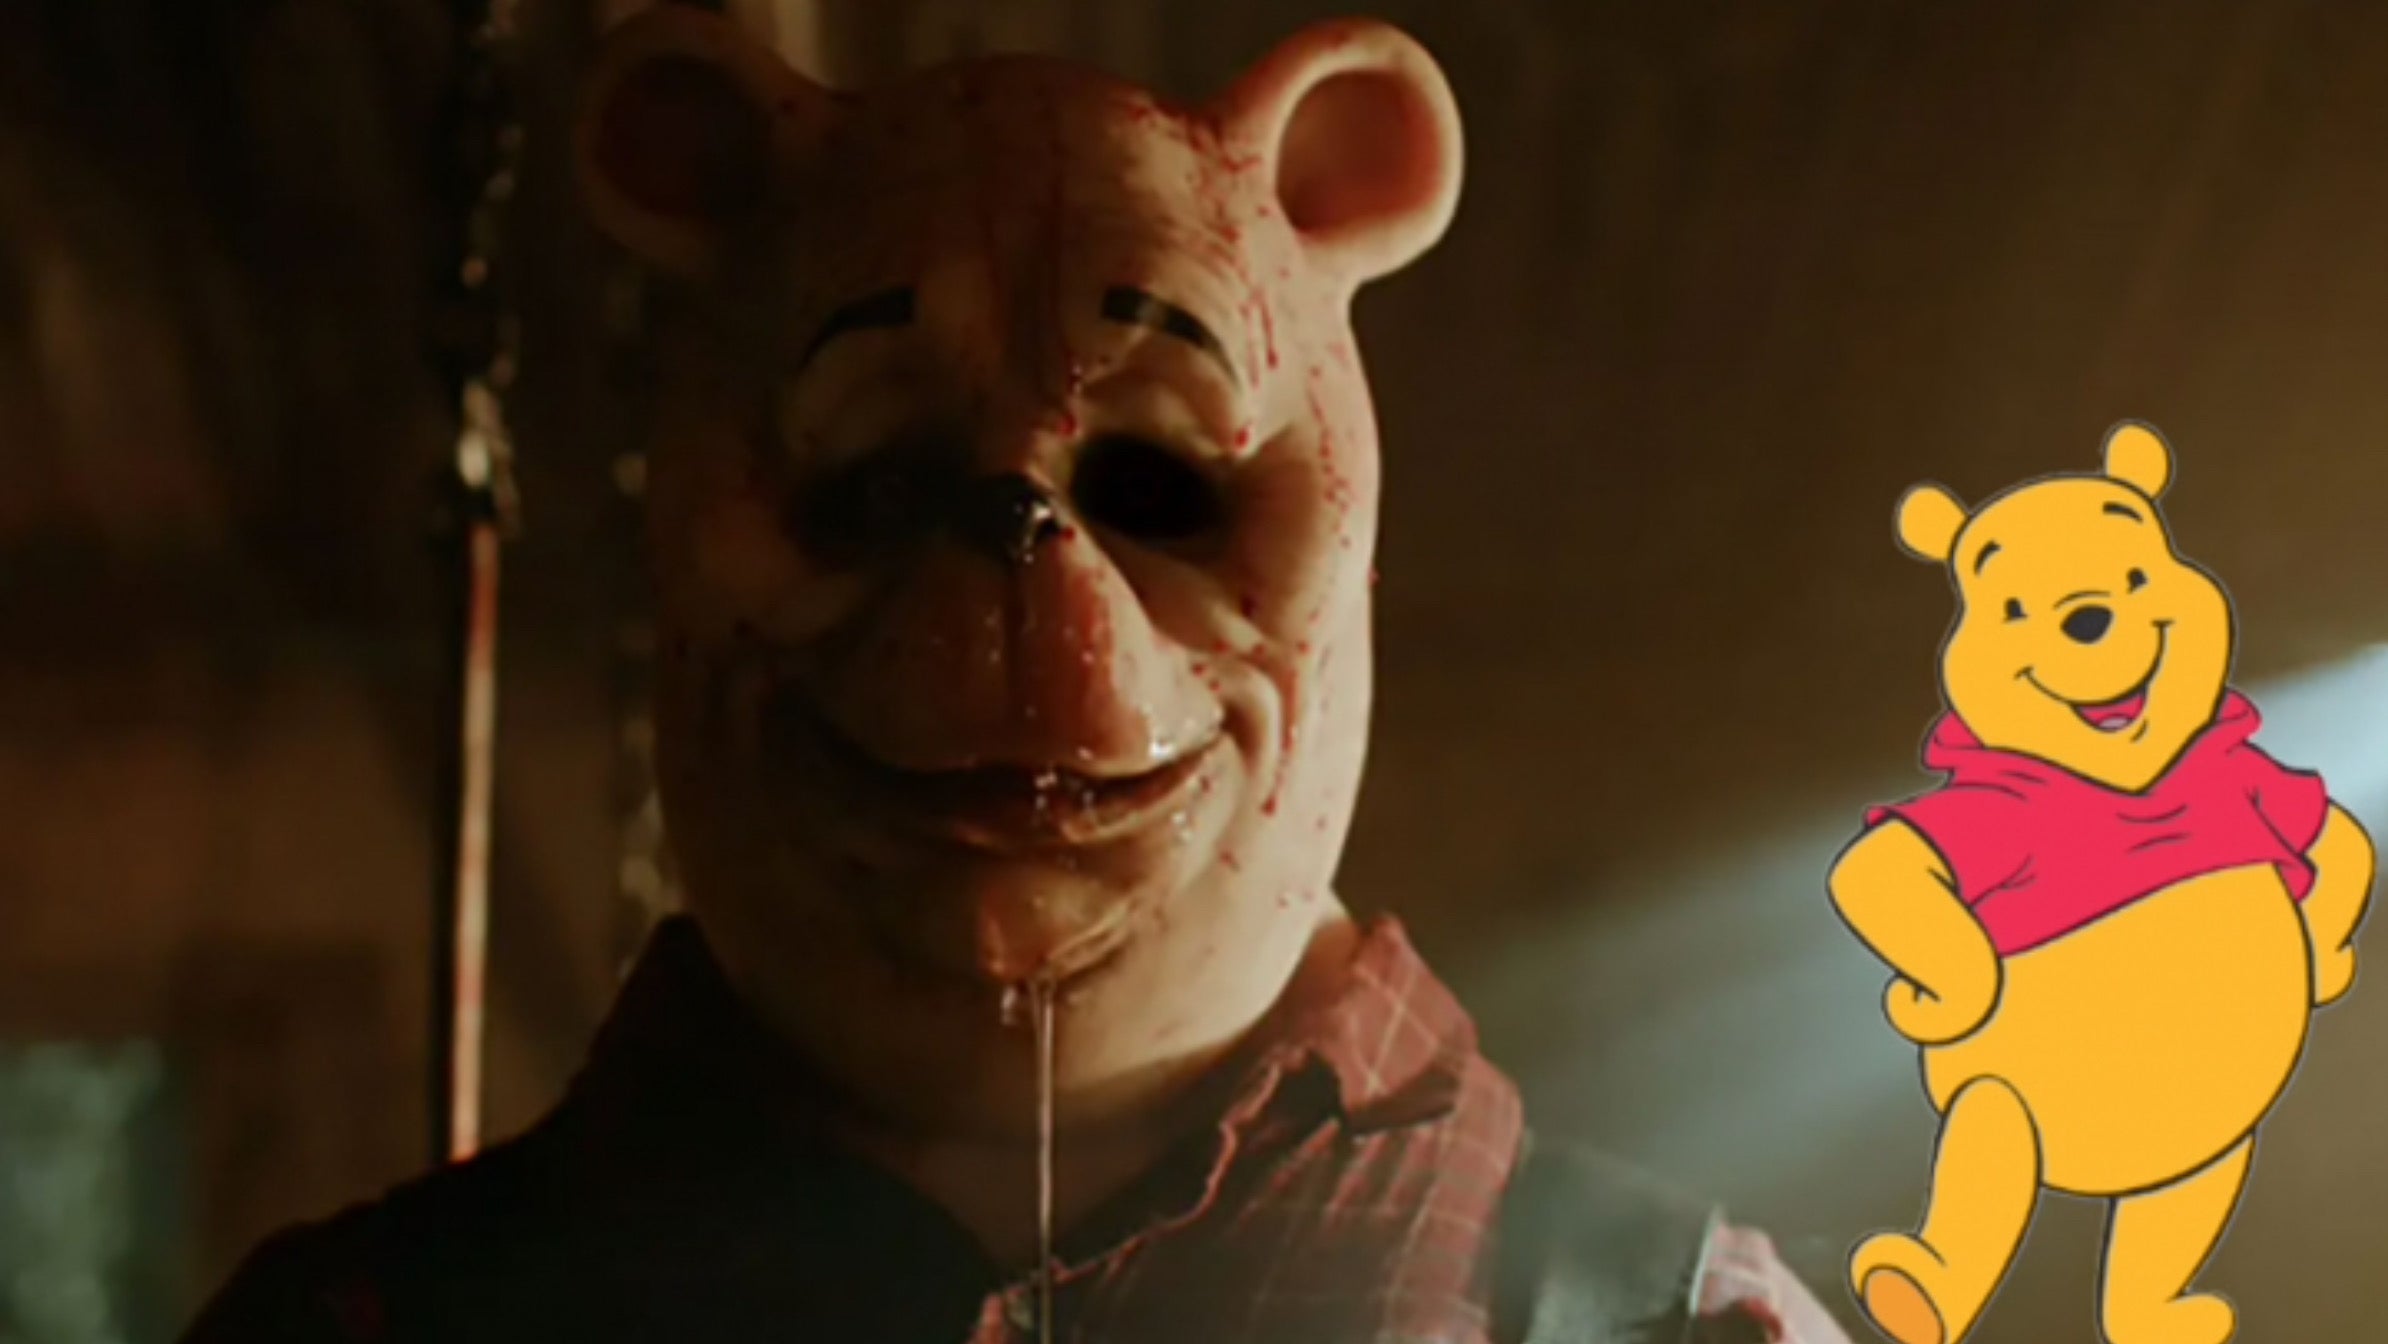 Winnie The Pooh turns into a killer in trashy horror movie trailer, Magnate Daily